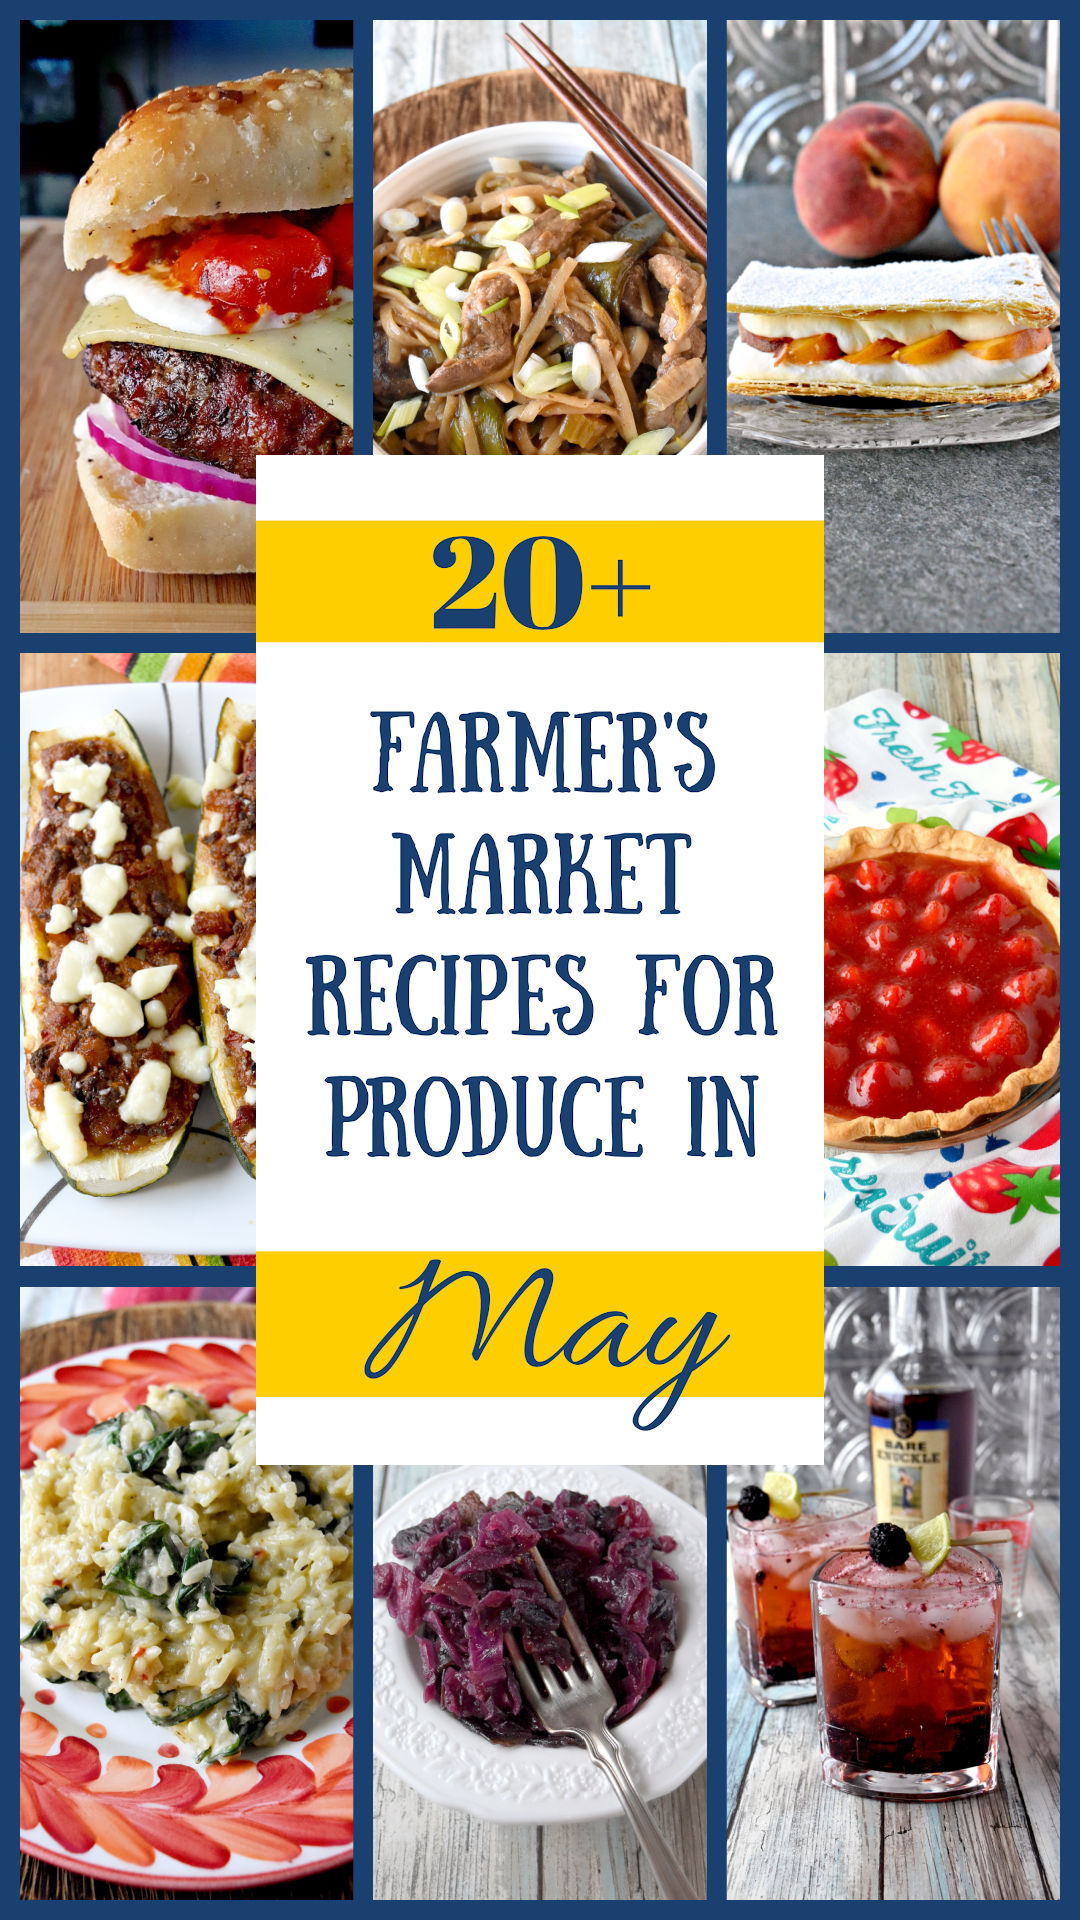 Sharing more than 20 Farmer's Market Recipes for May. Markets are opening up all over the country so take advantage of the fresh produce and try some of these seasonal recipes.  #FarmersMarket #seasonal #cookfortheseasons #inseasonproduce 
